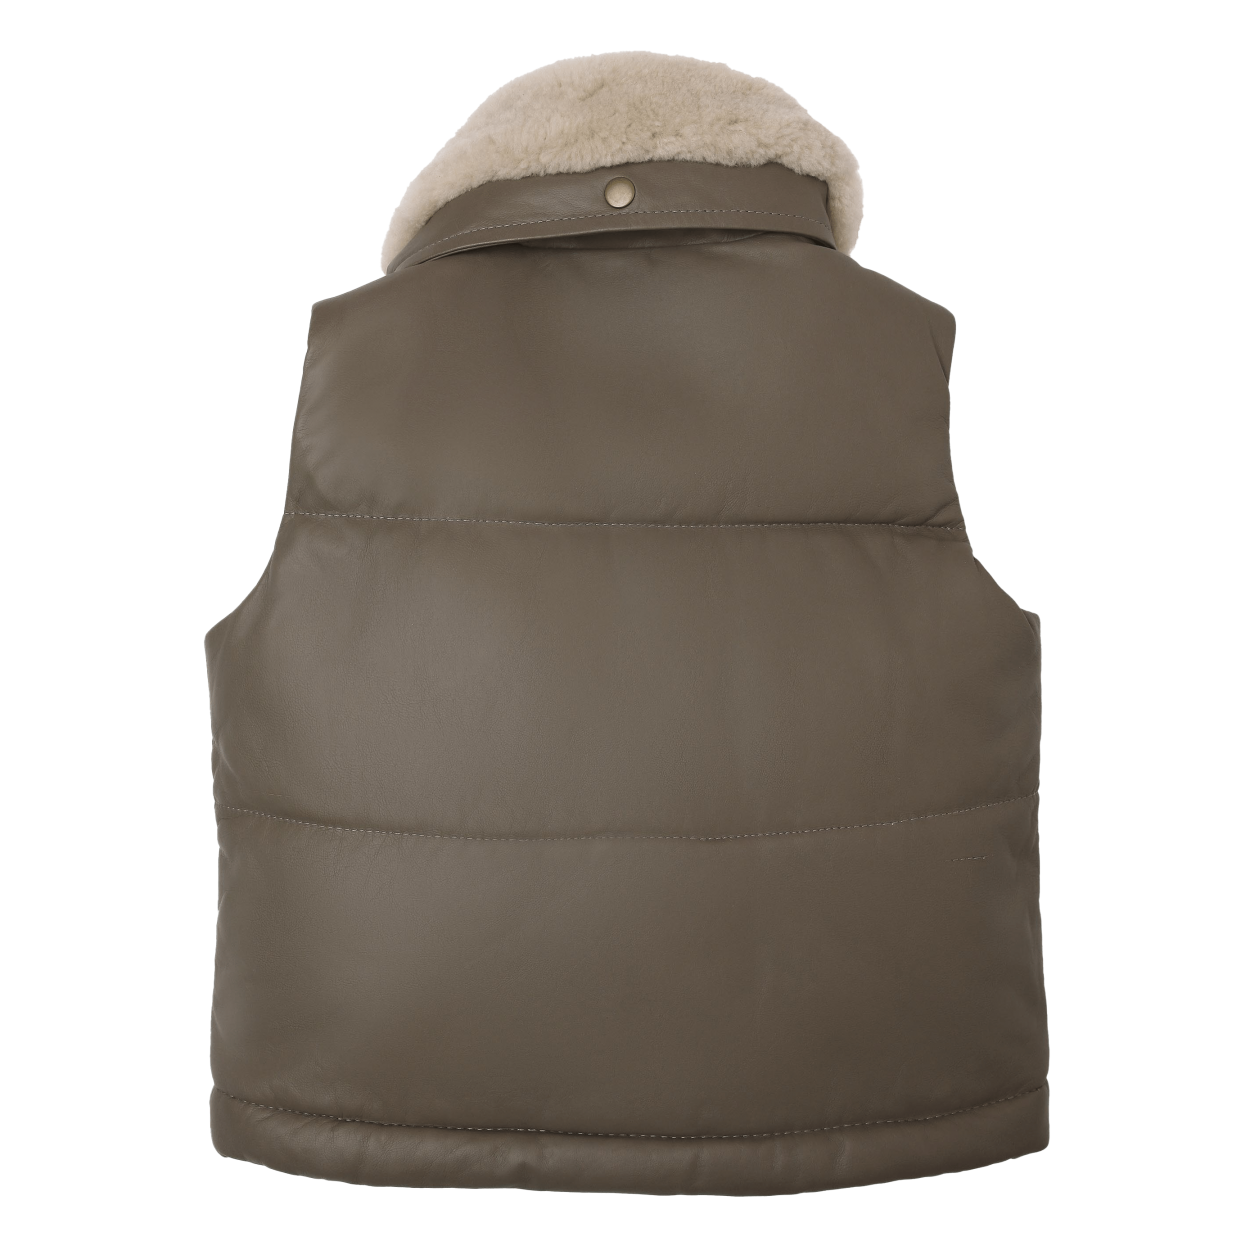 Bees Leather Bodywarmer | Dark Taupe Leather